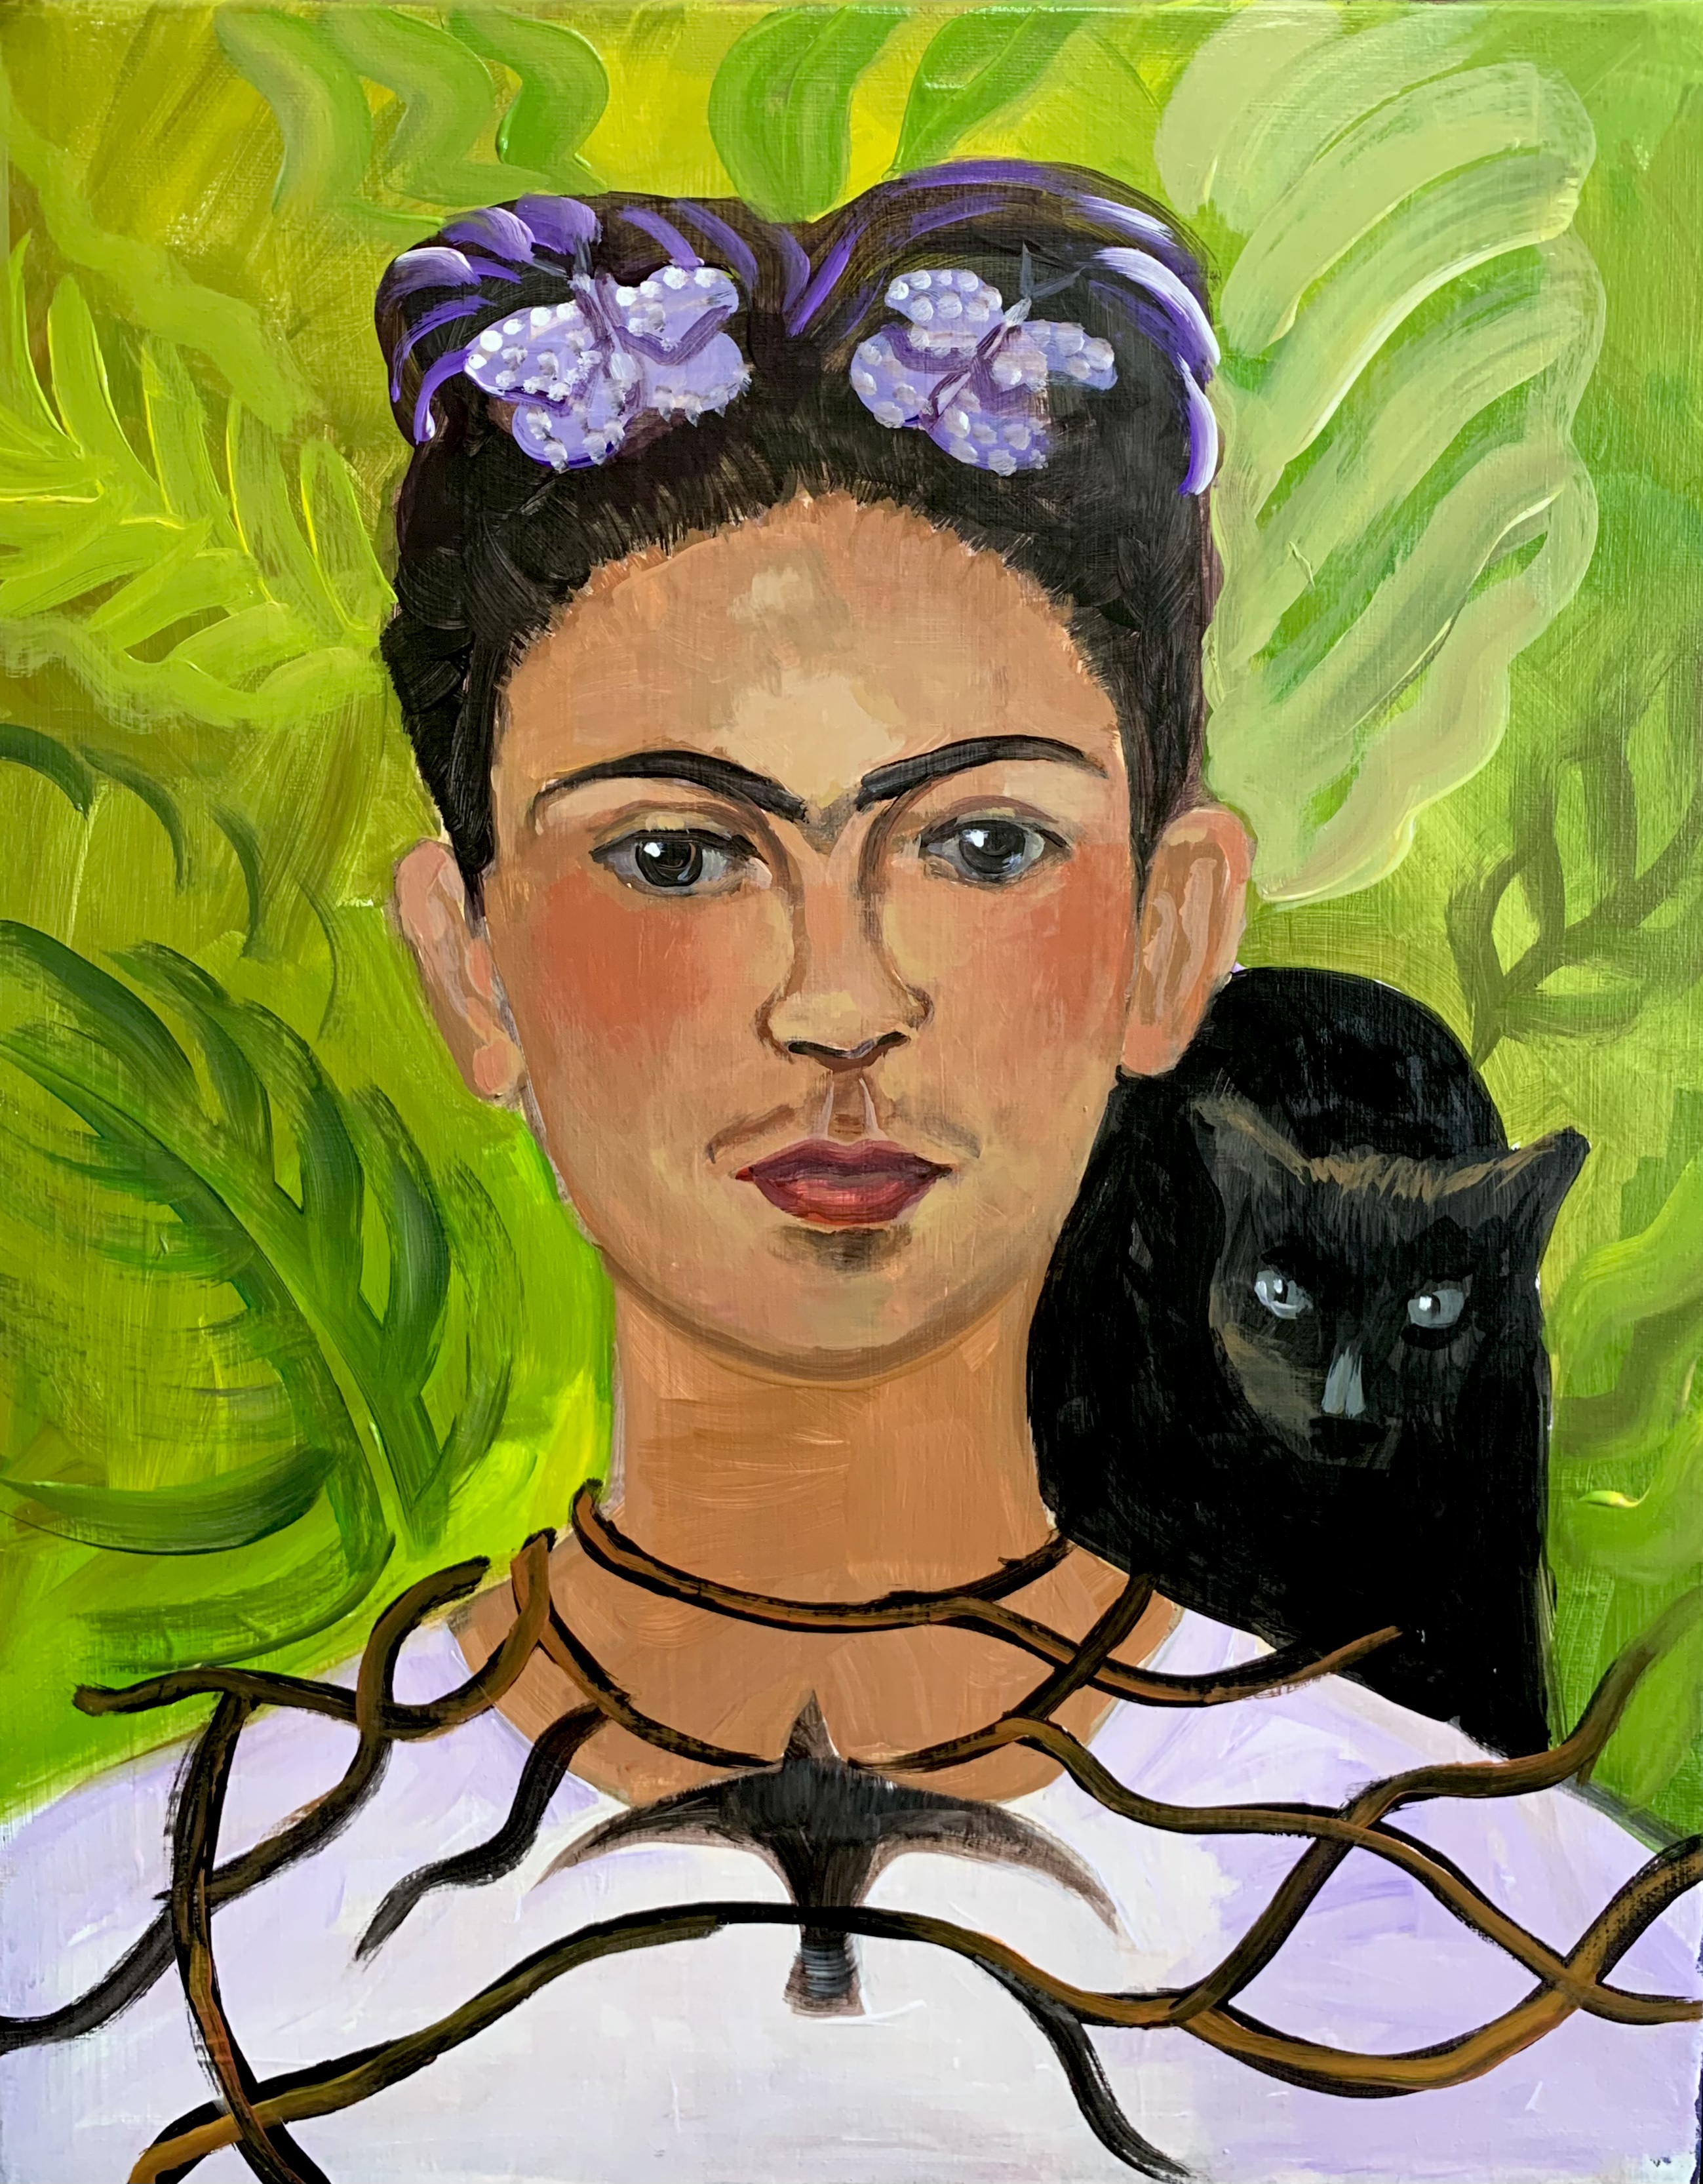 A Frida Kahlo  Self Portrait with Thorn Necklace and Hummingbird experience project by Yaymaker